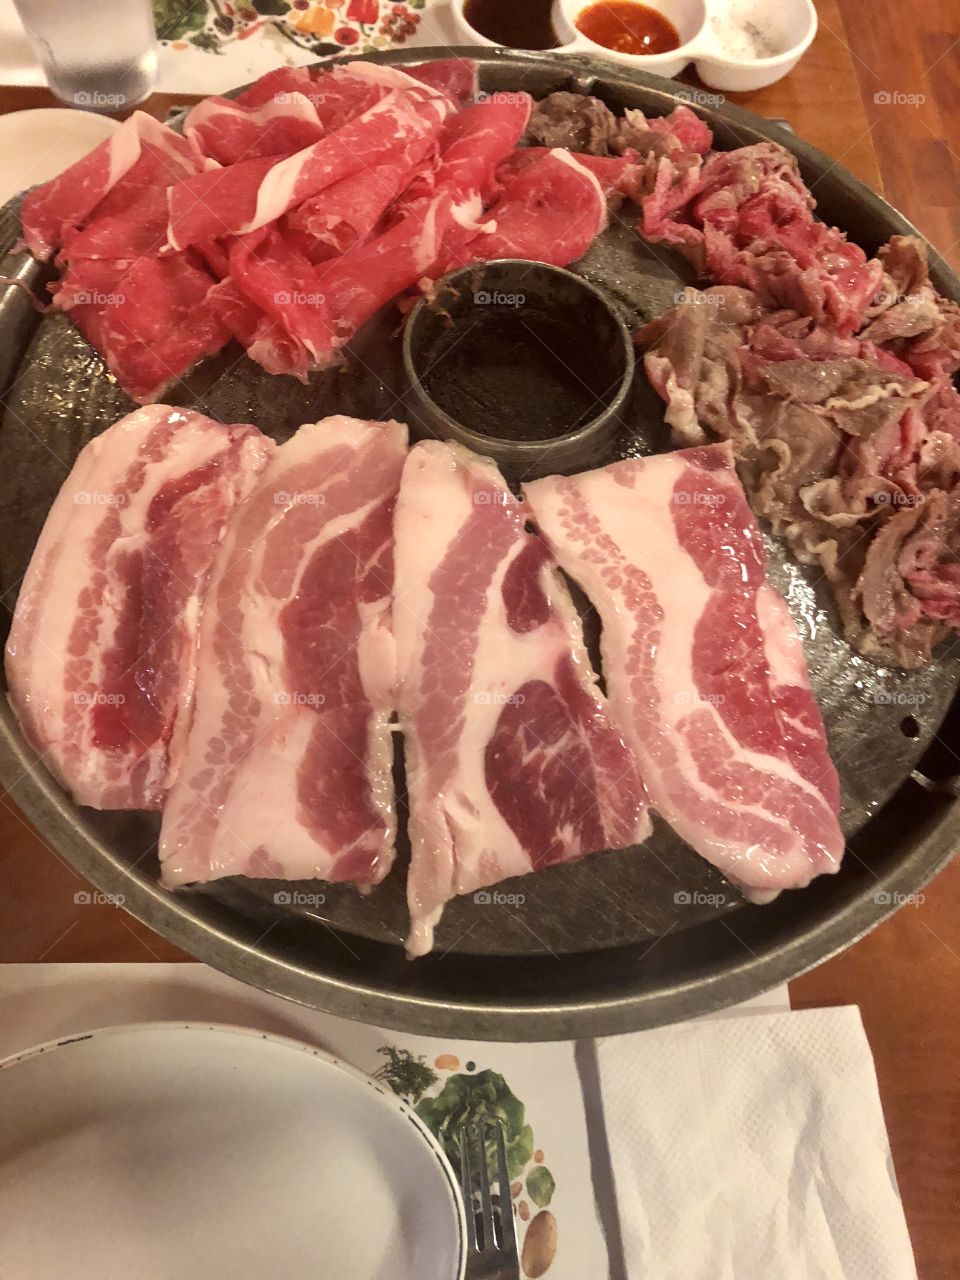 Korean BBQ meats on table grill.